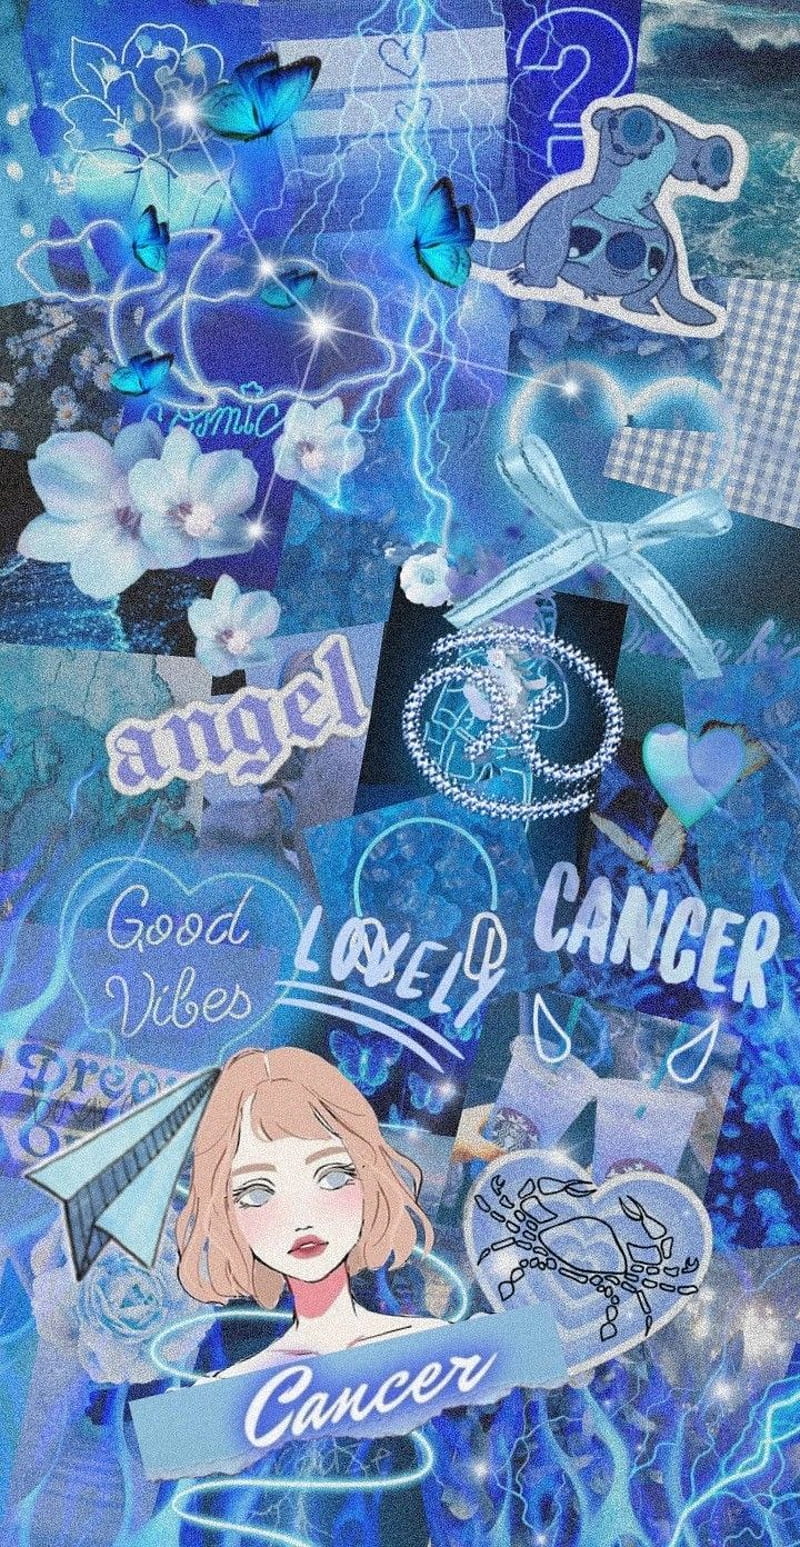 A blue background with various stickers and images - Cancer